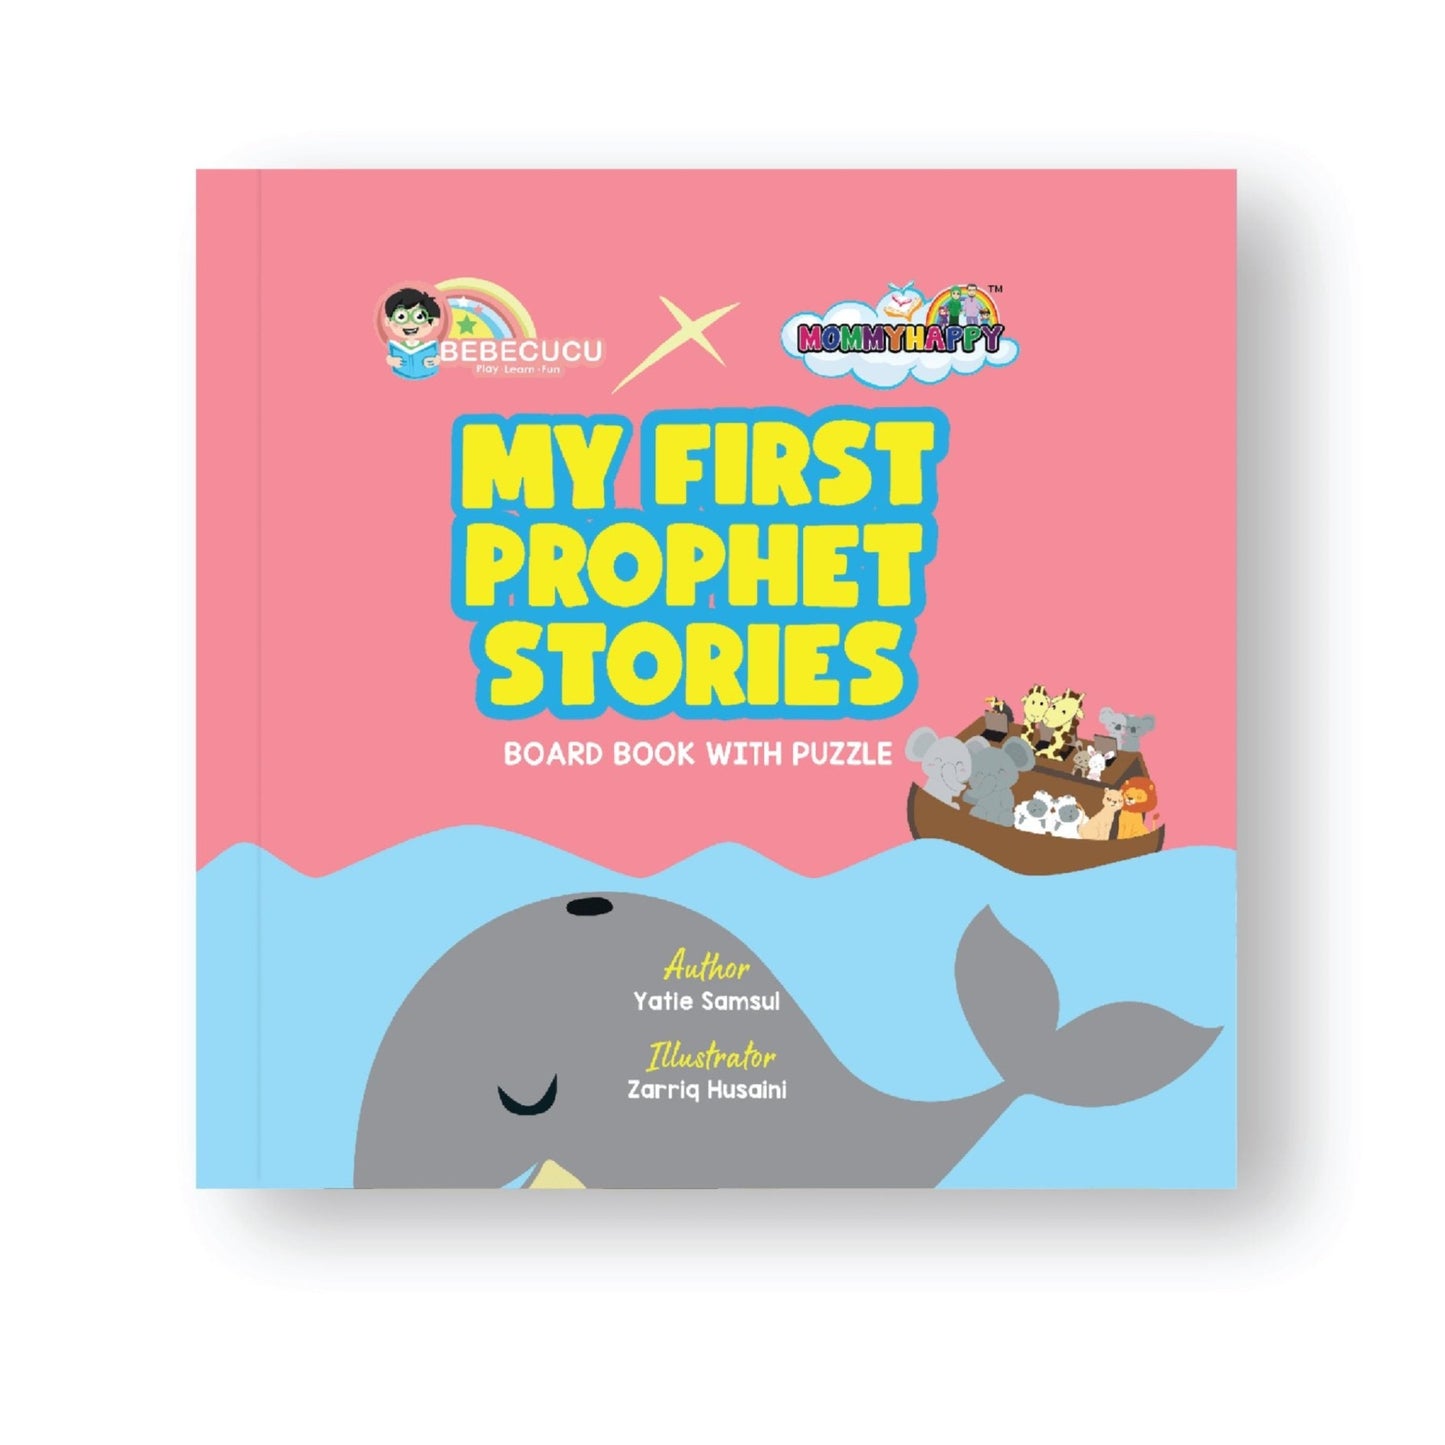 My First Prophet Stories - Board Book with Puzzle